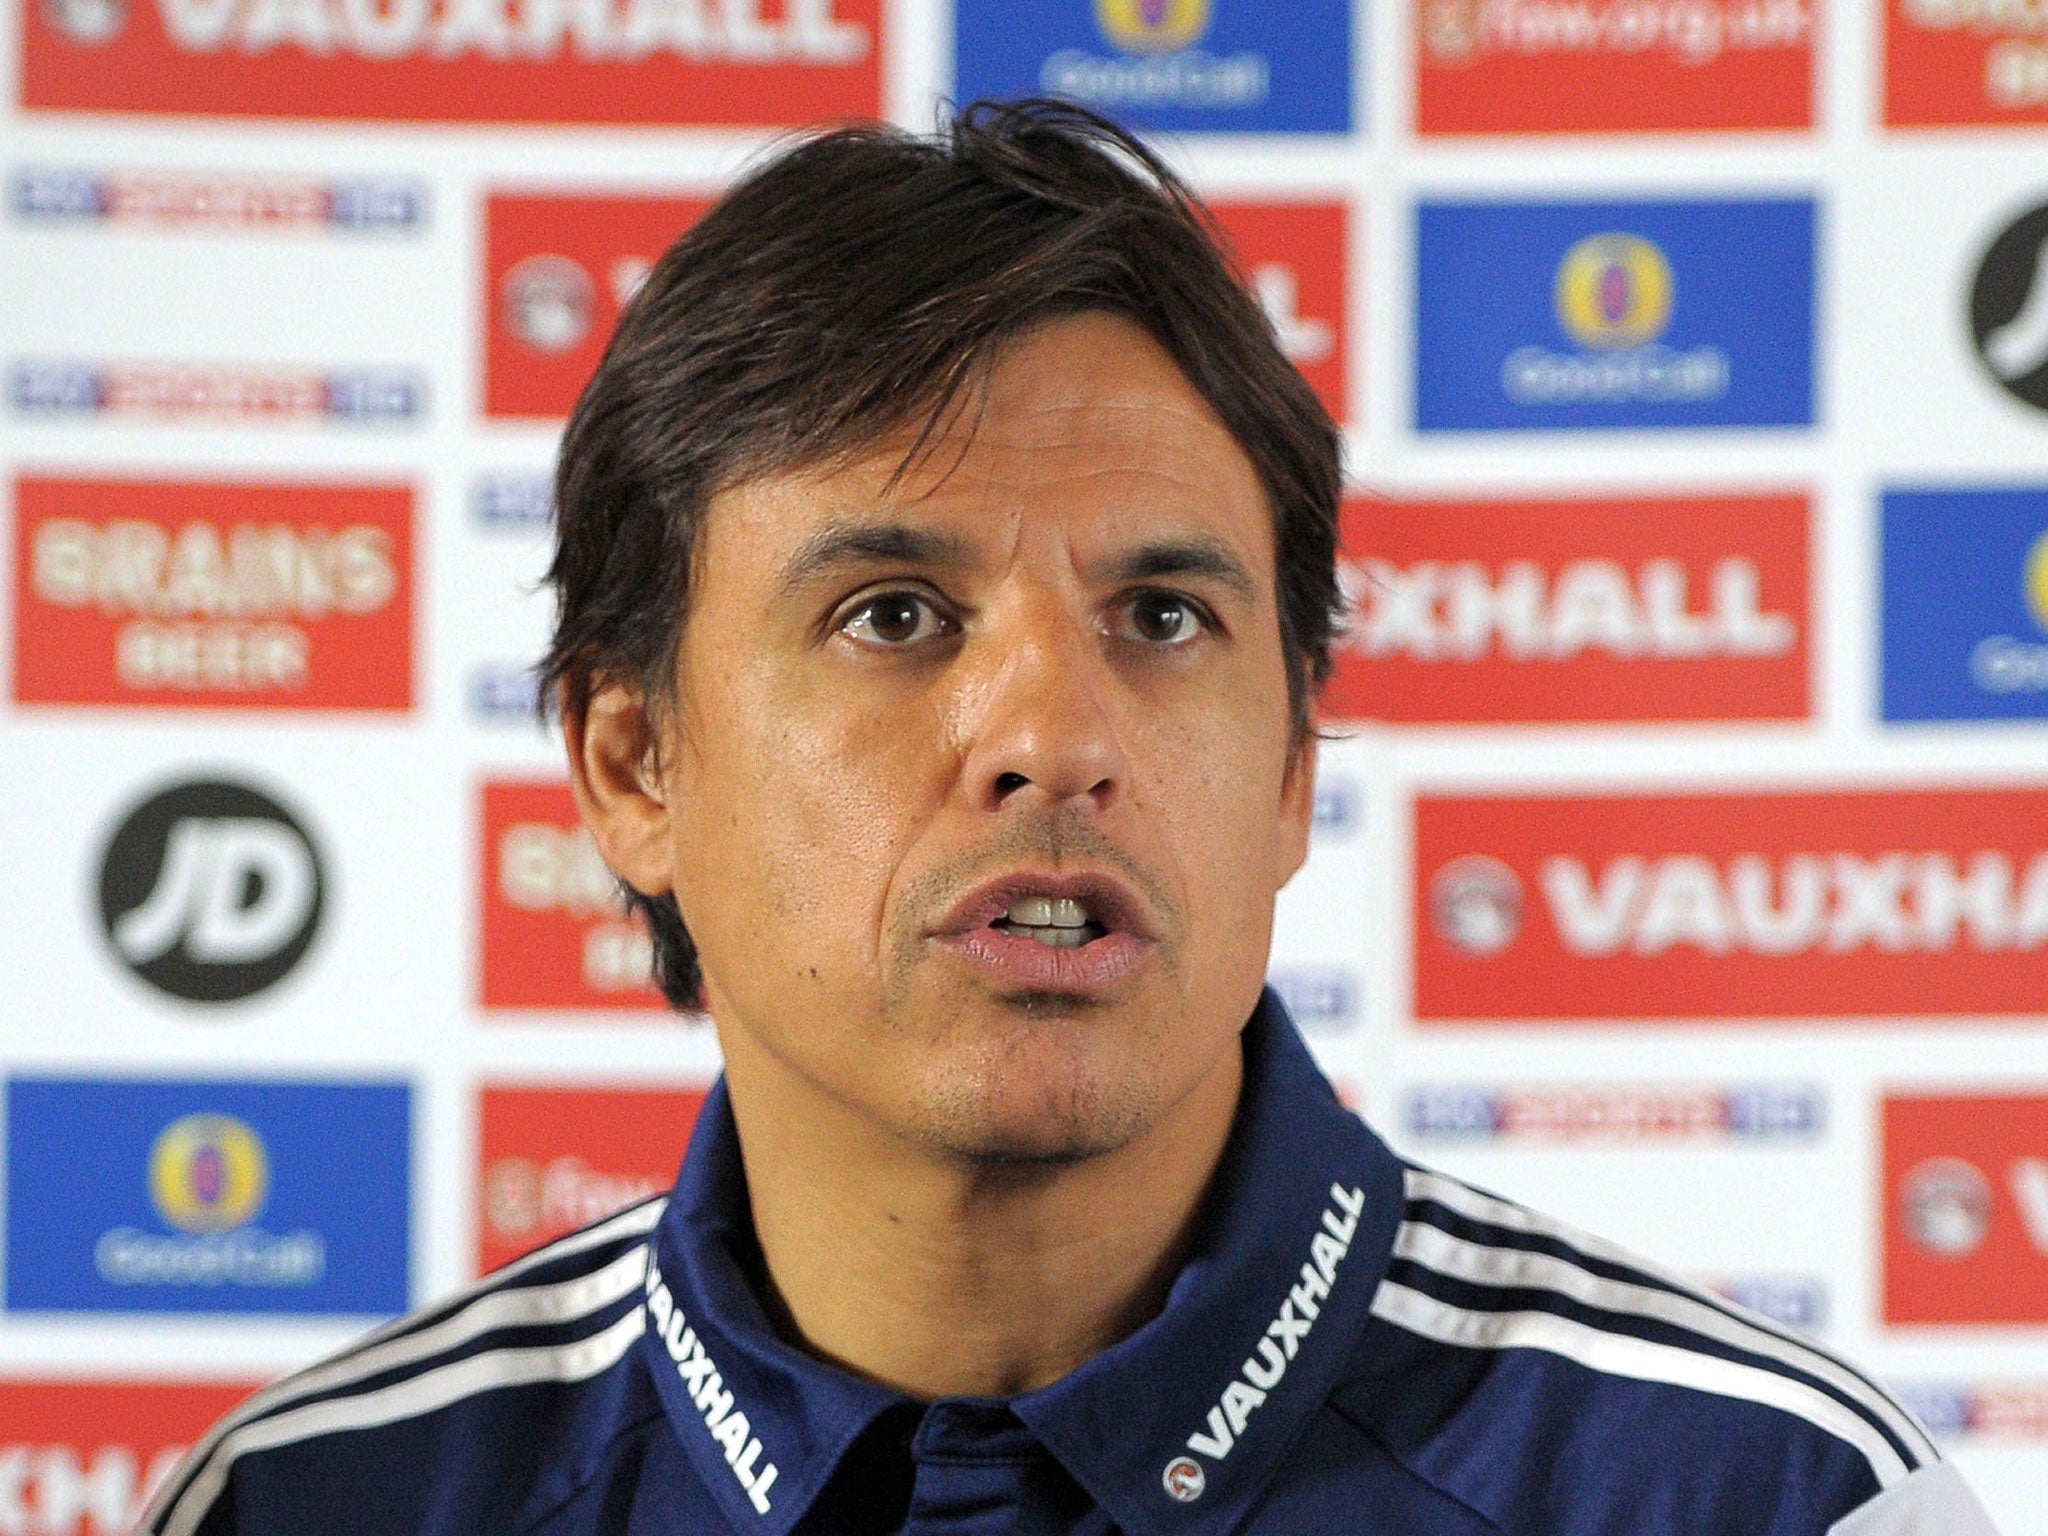 Chris Coleman says he wants 'to finish what he started' with Wales